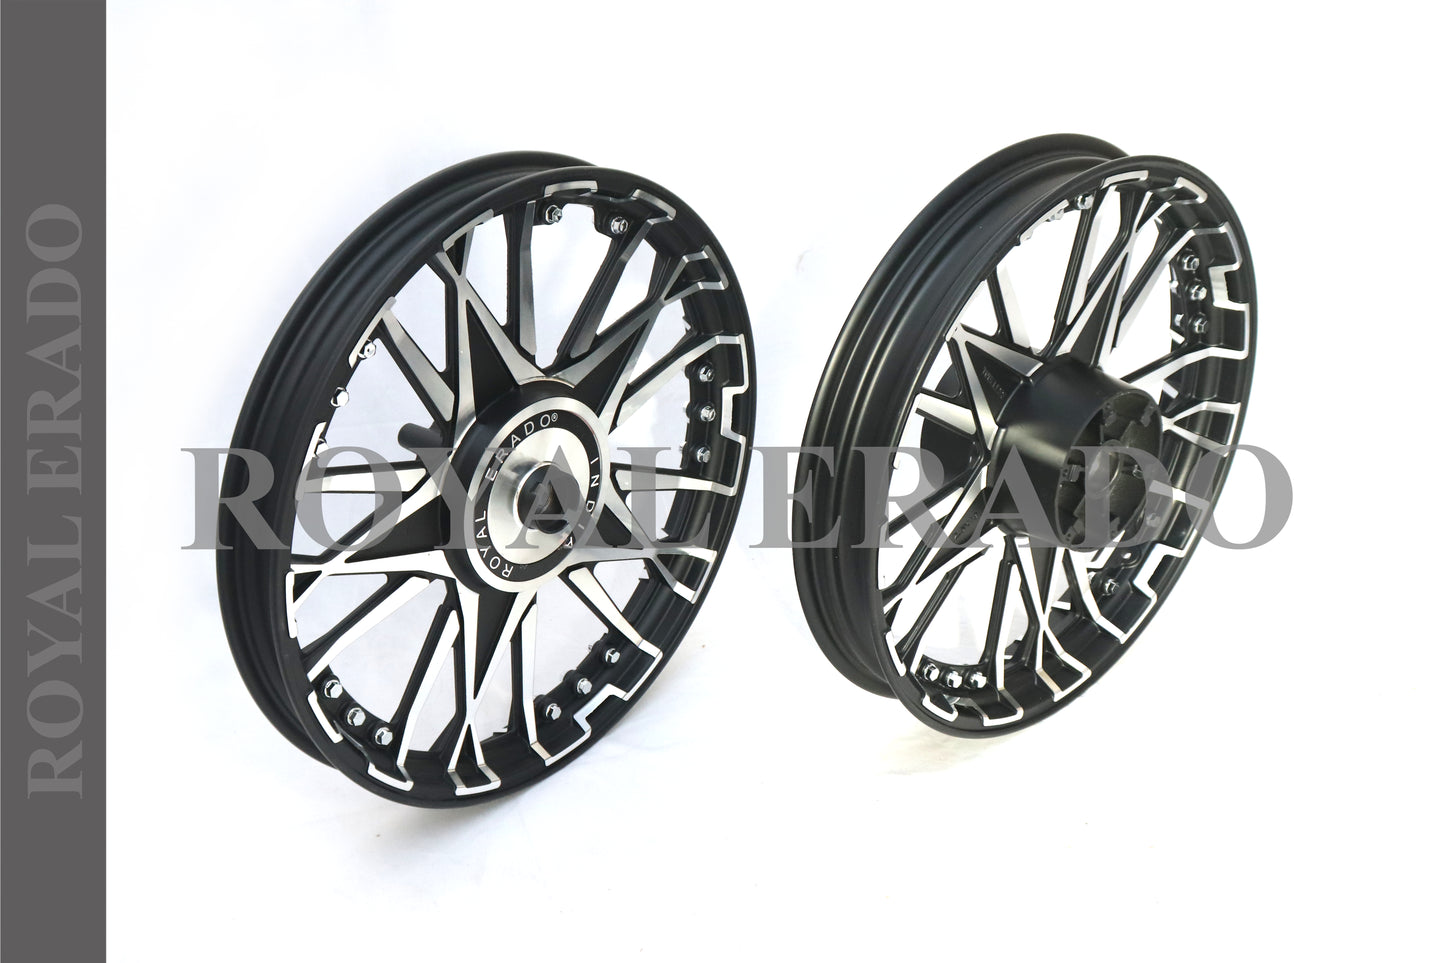 DOUBLE STAR DESIGN alloy wheel for thunderbird and classic double disc